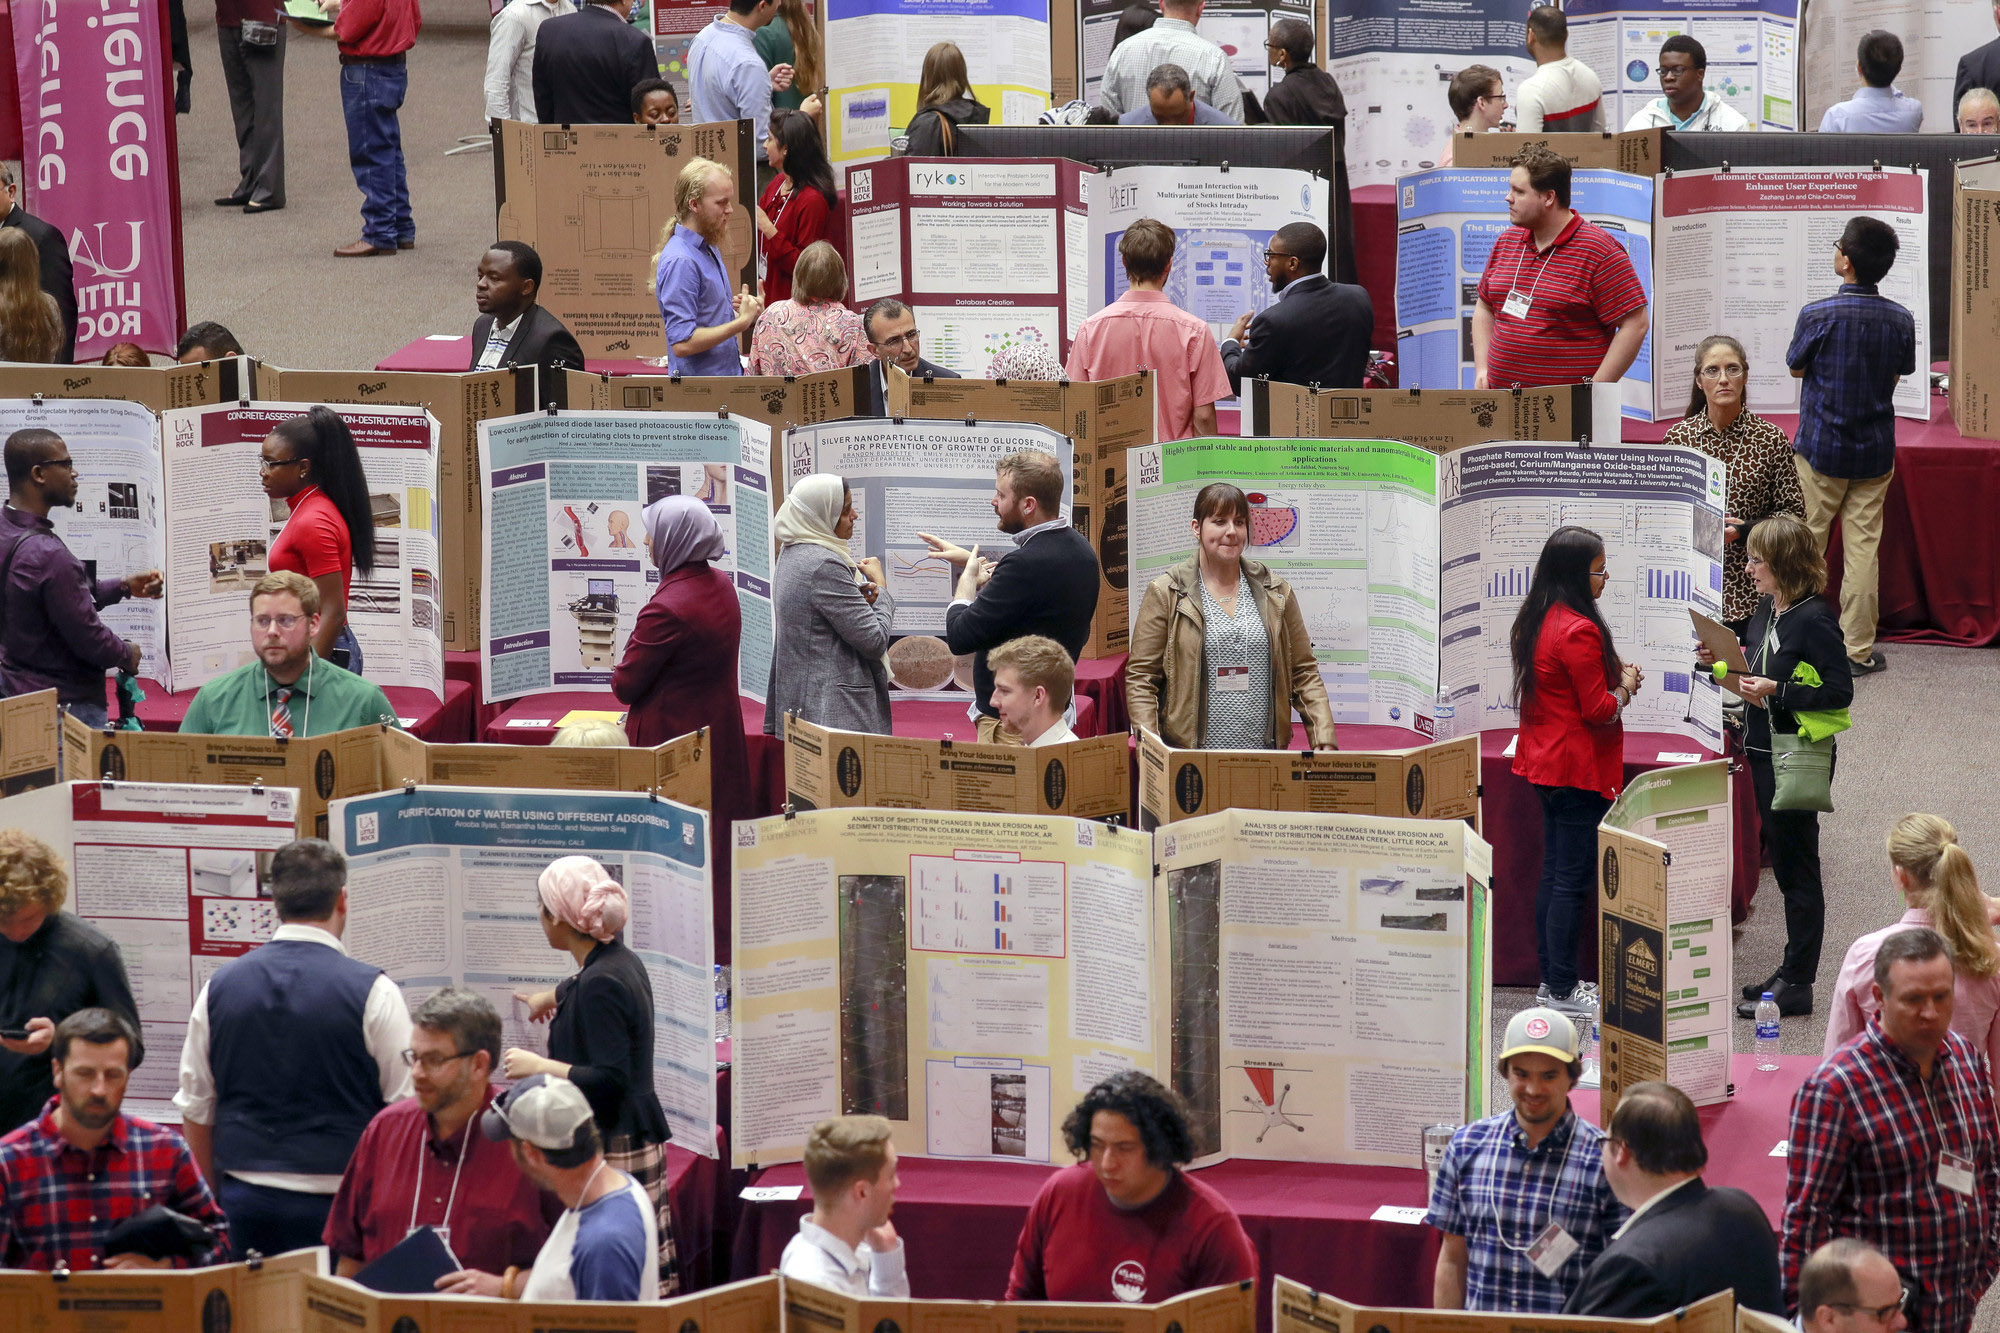 Students present their research projects during the Research and Creative Works event.